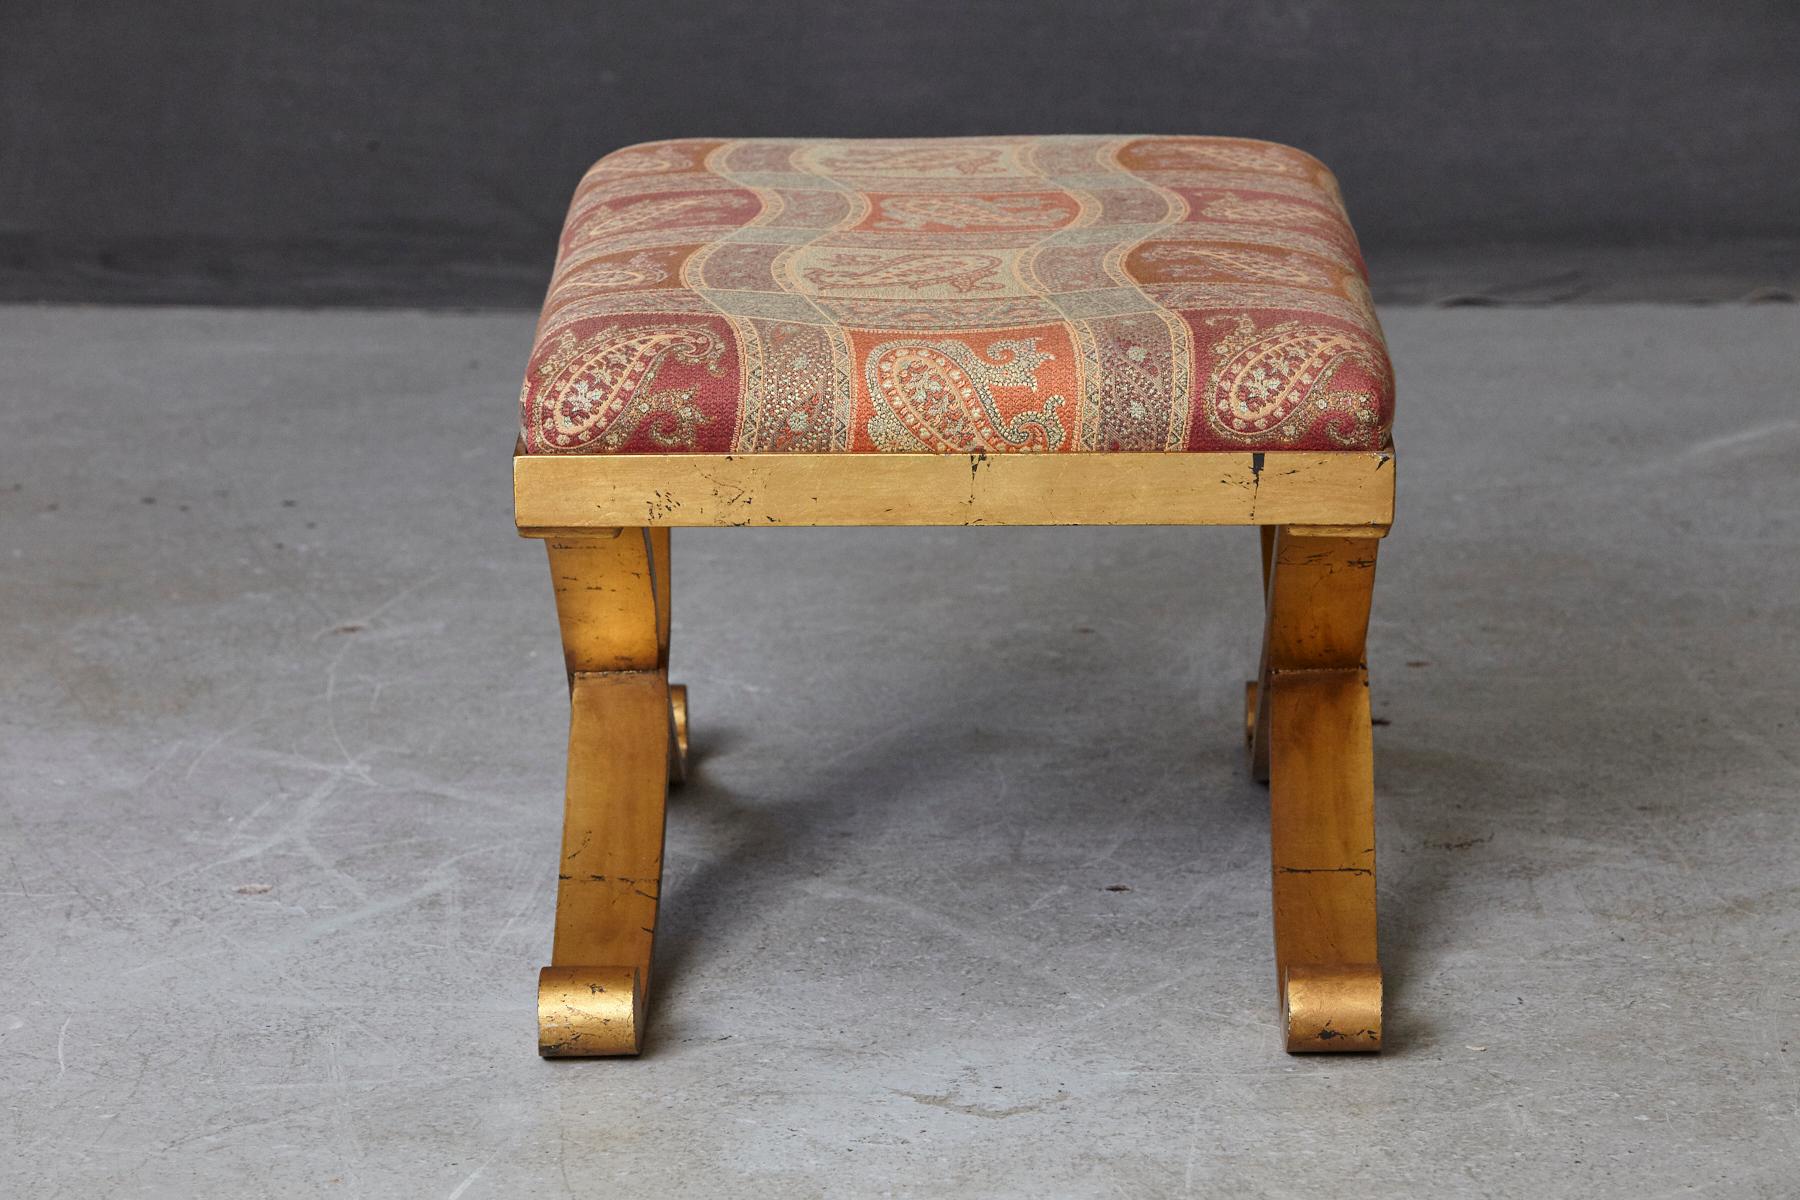 Modern Gild Patinated Metal Bench with Cross Legs Upholstered in Paisley Fabric